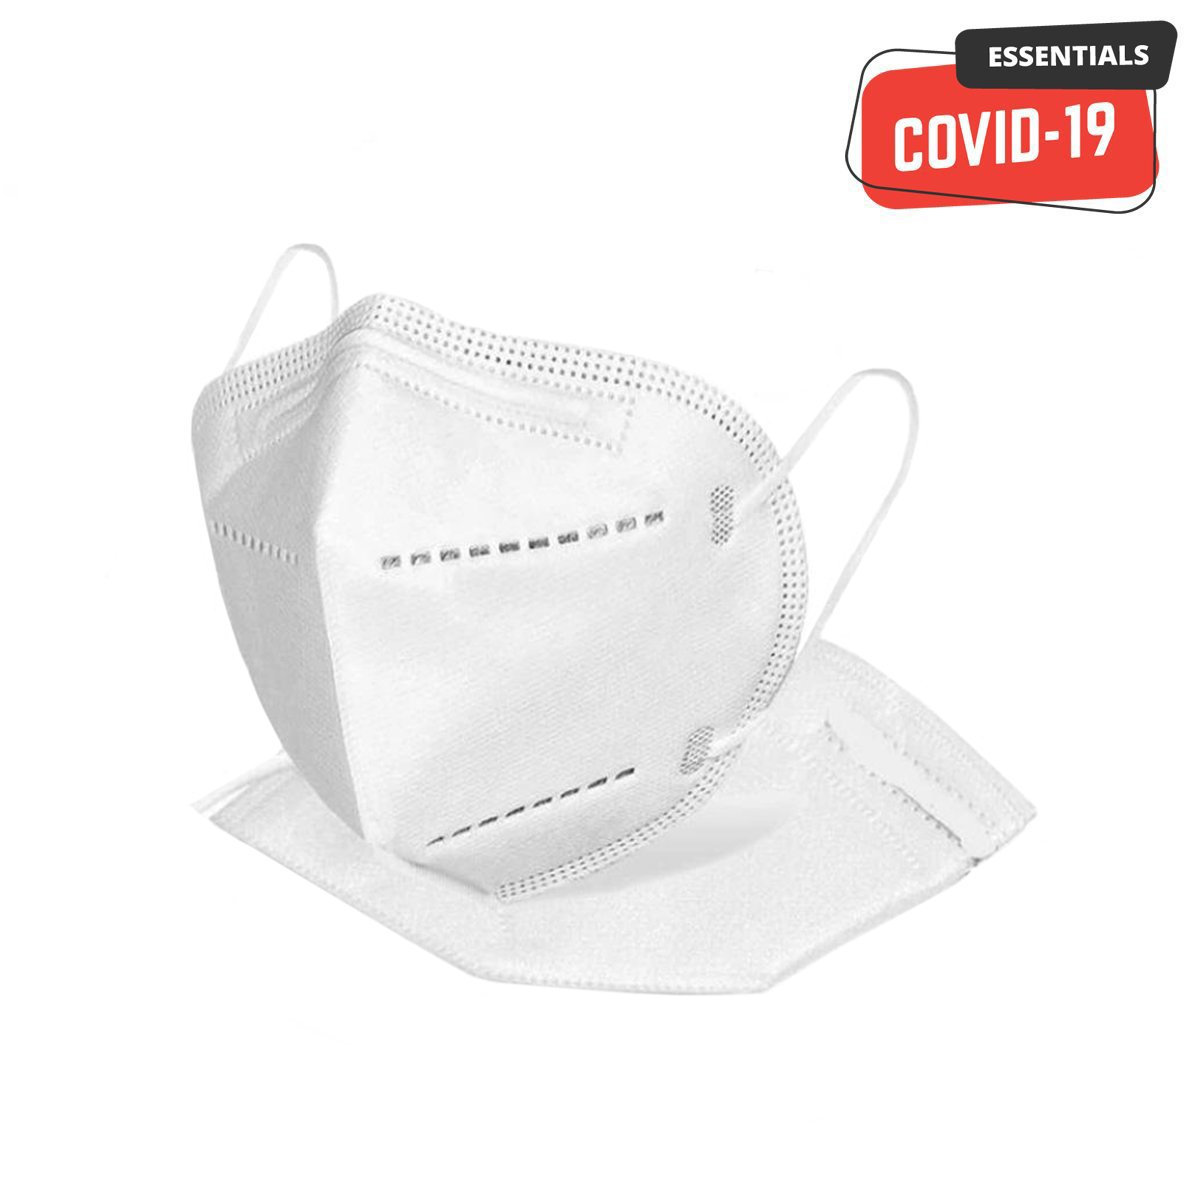 KN95 Respirator Face Mask | 4 Ply - White - 2 Count - 1